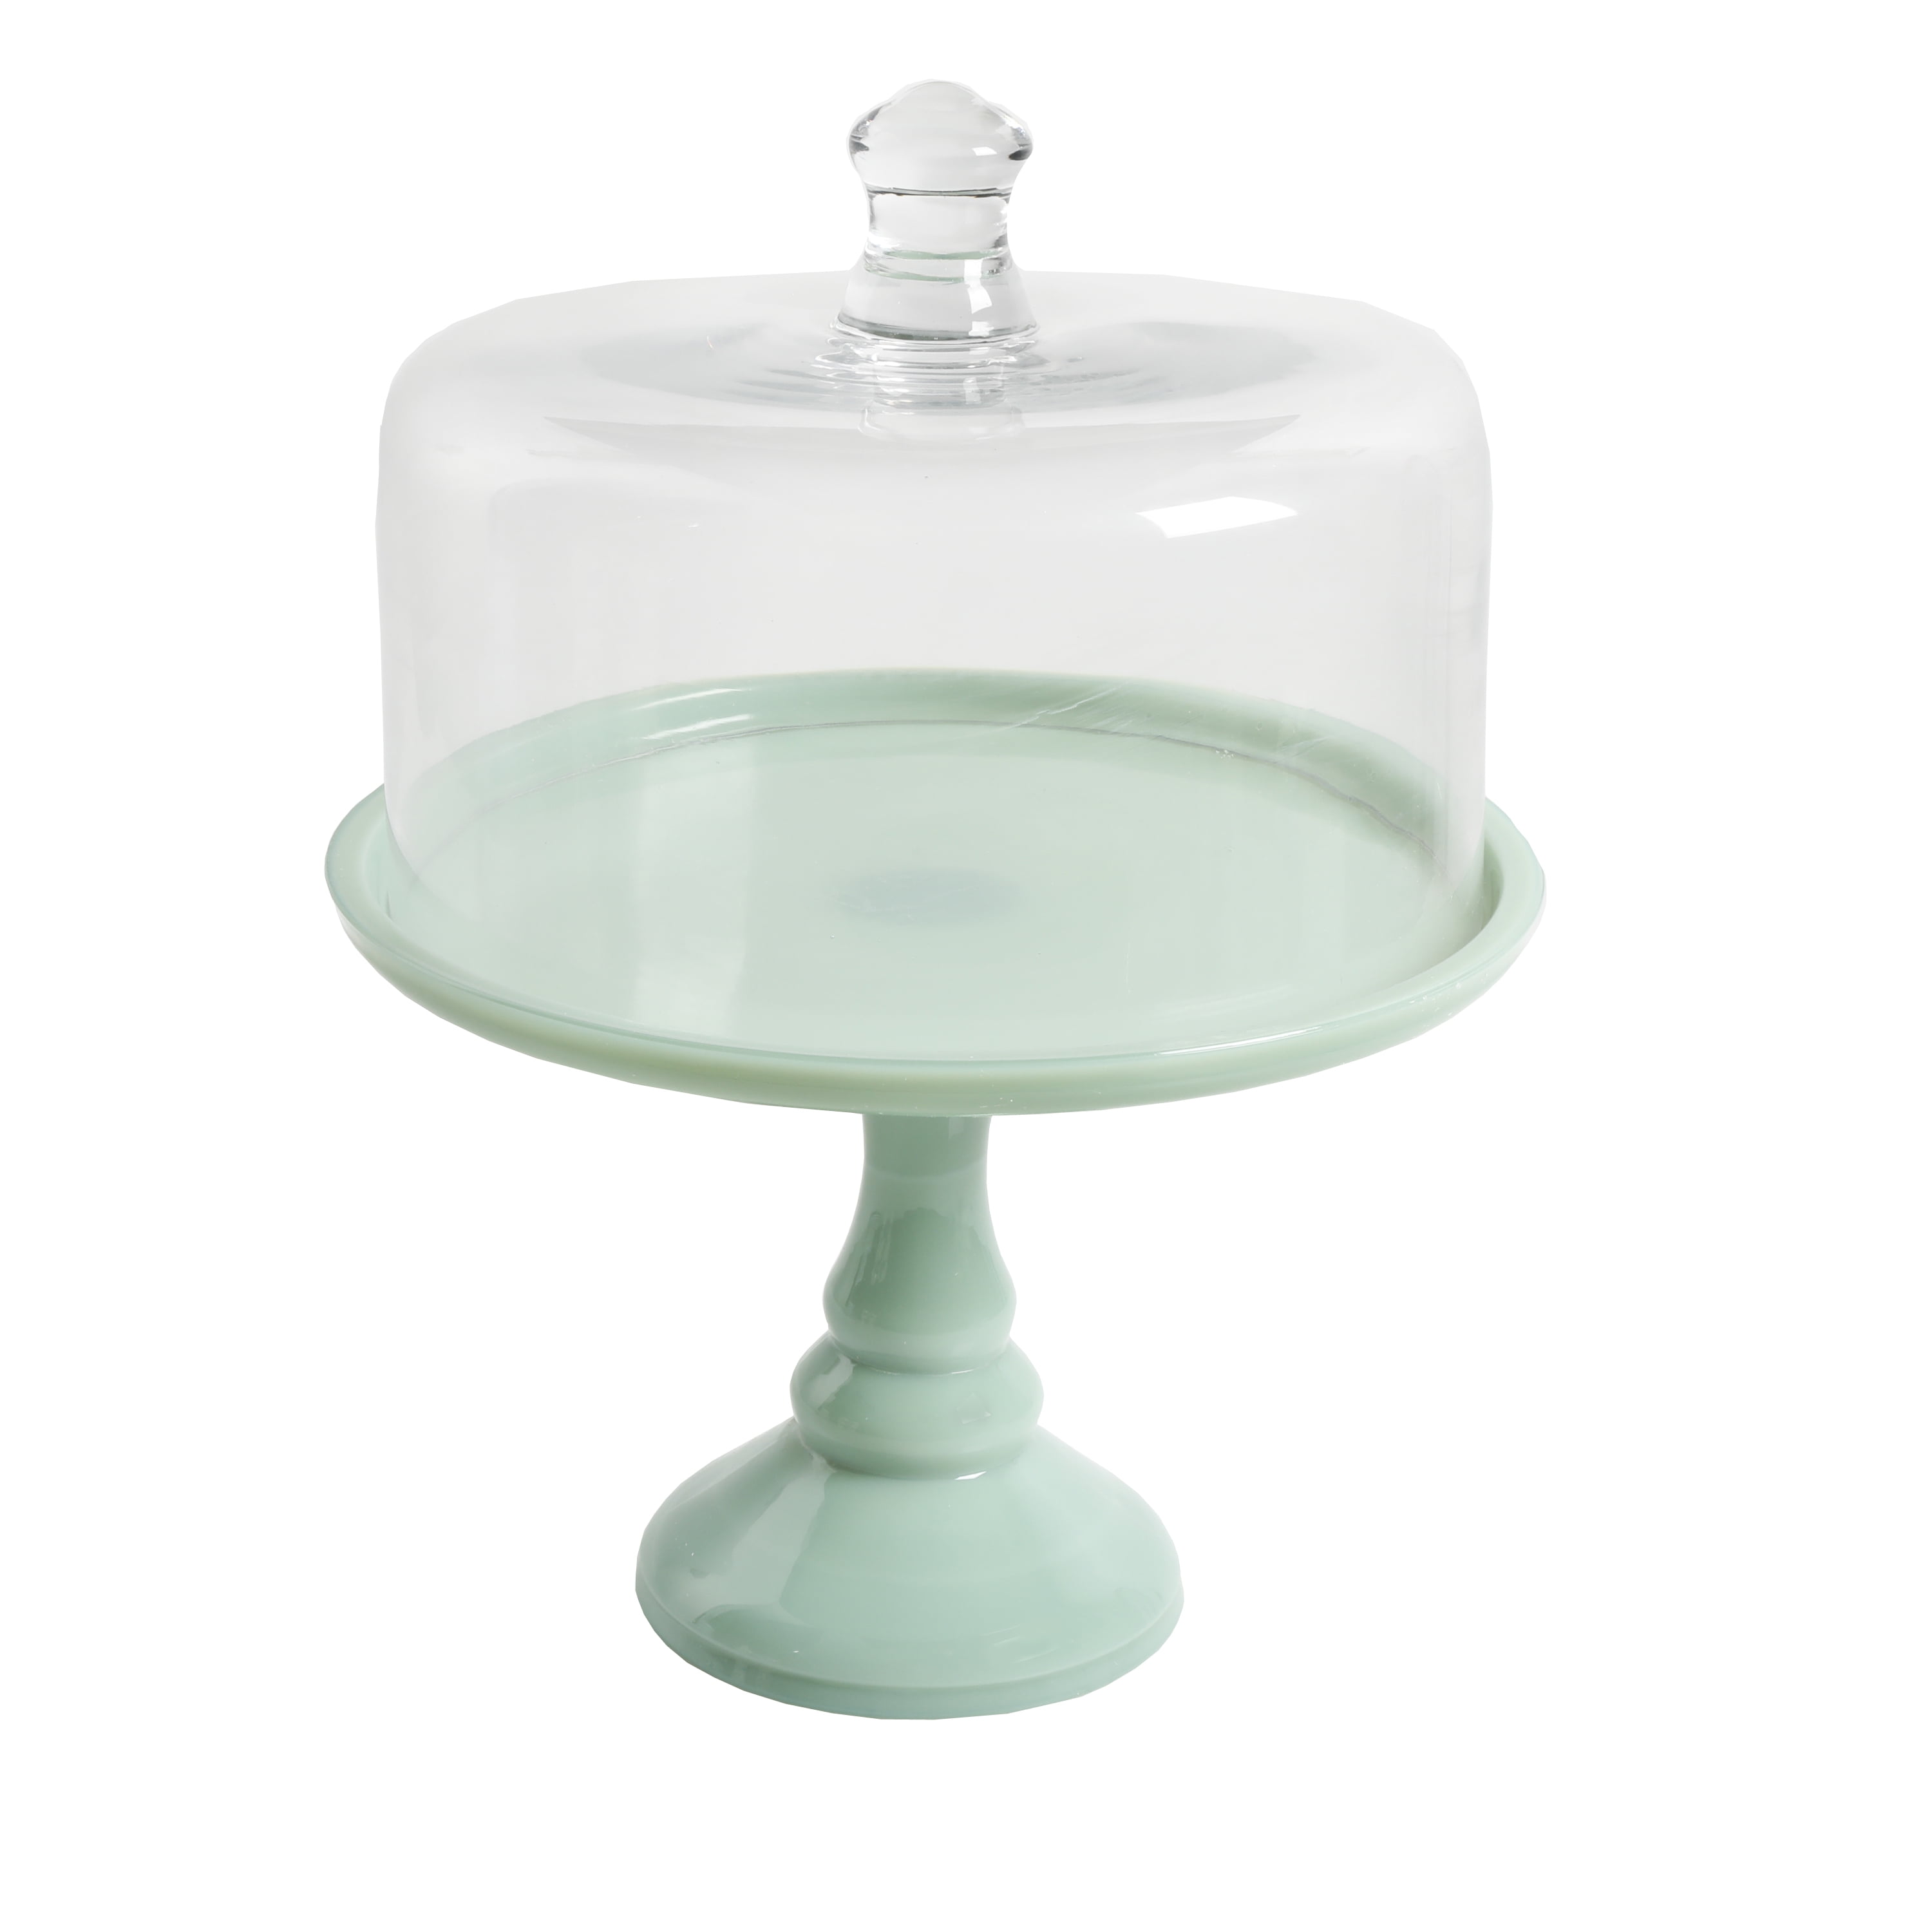 The Pioneer Woman Timeless Beauty 10-inch Cake Stand with Glass Cover, Mint  Green 